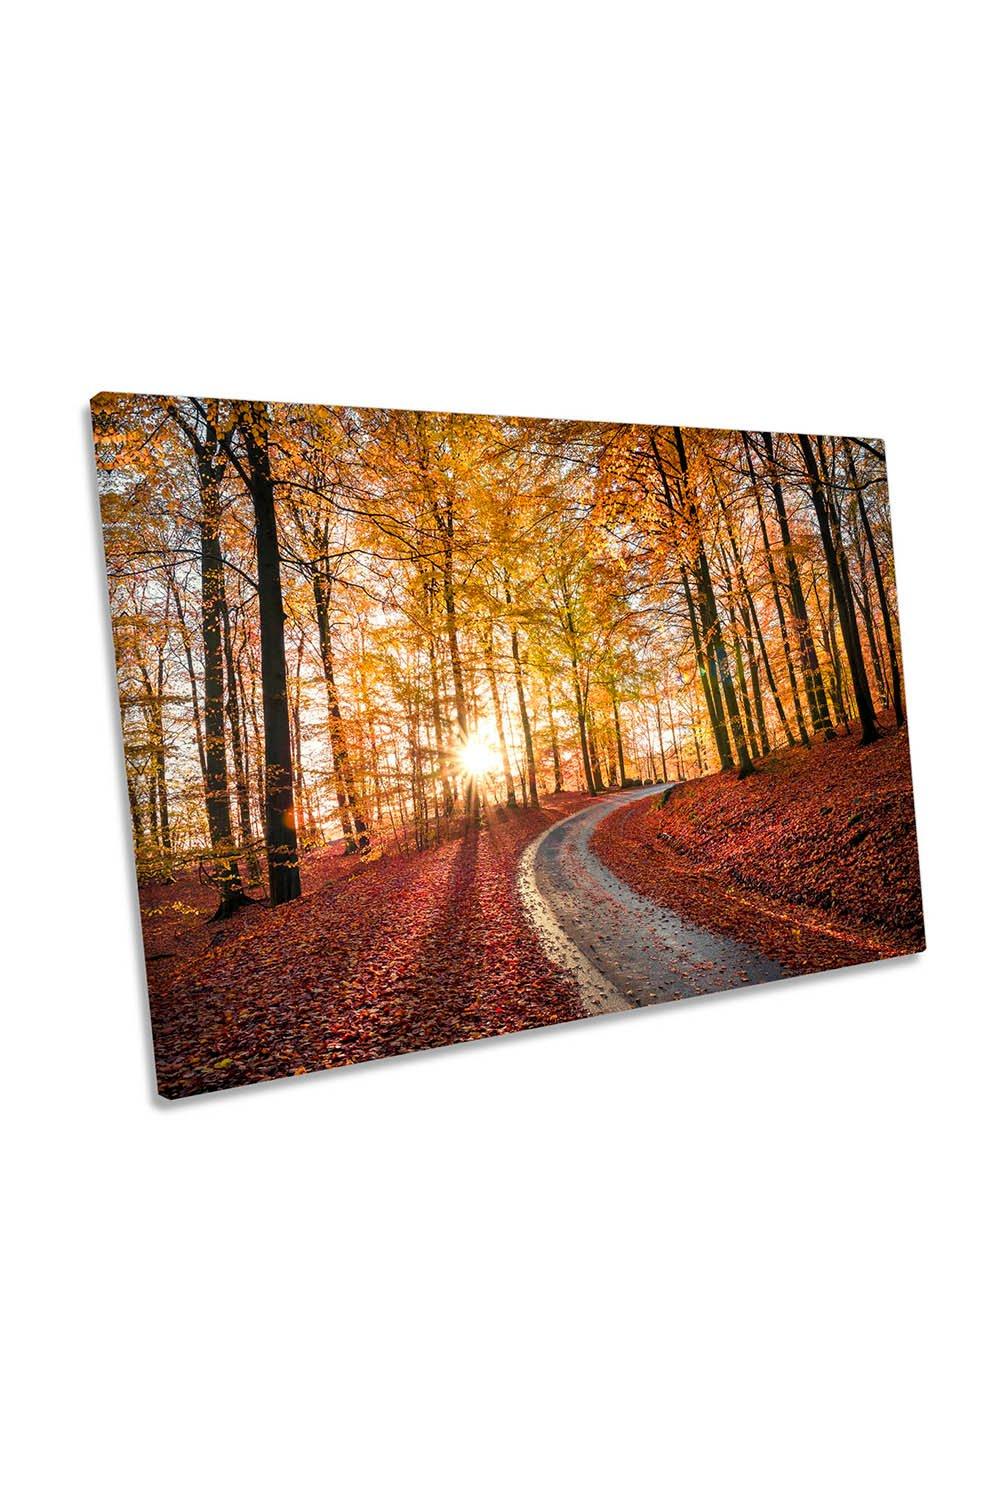 Autumn Leaves Roadway Path Forest Canvas Wall Art Picture Print